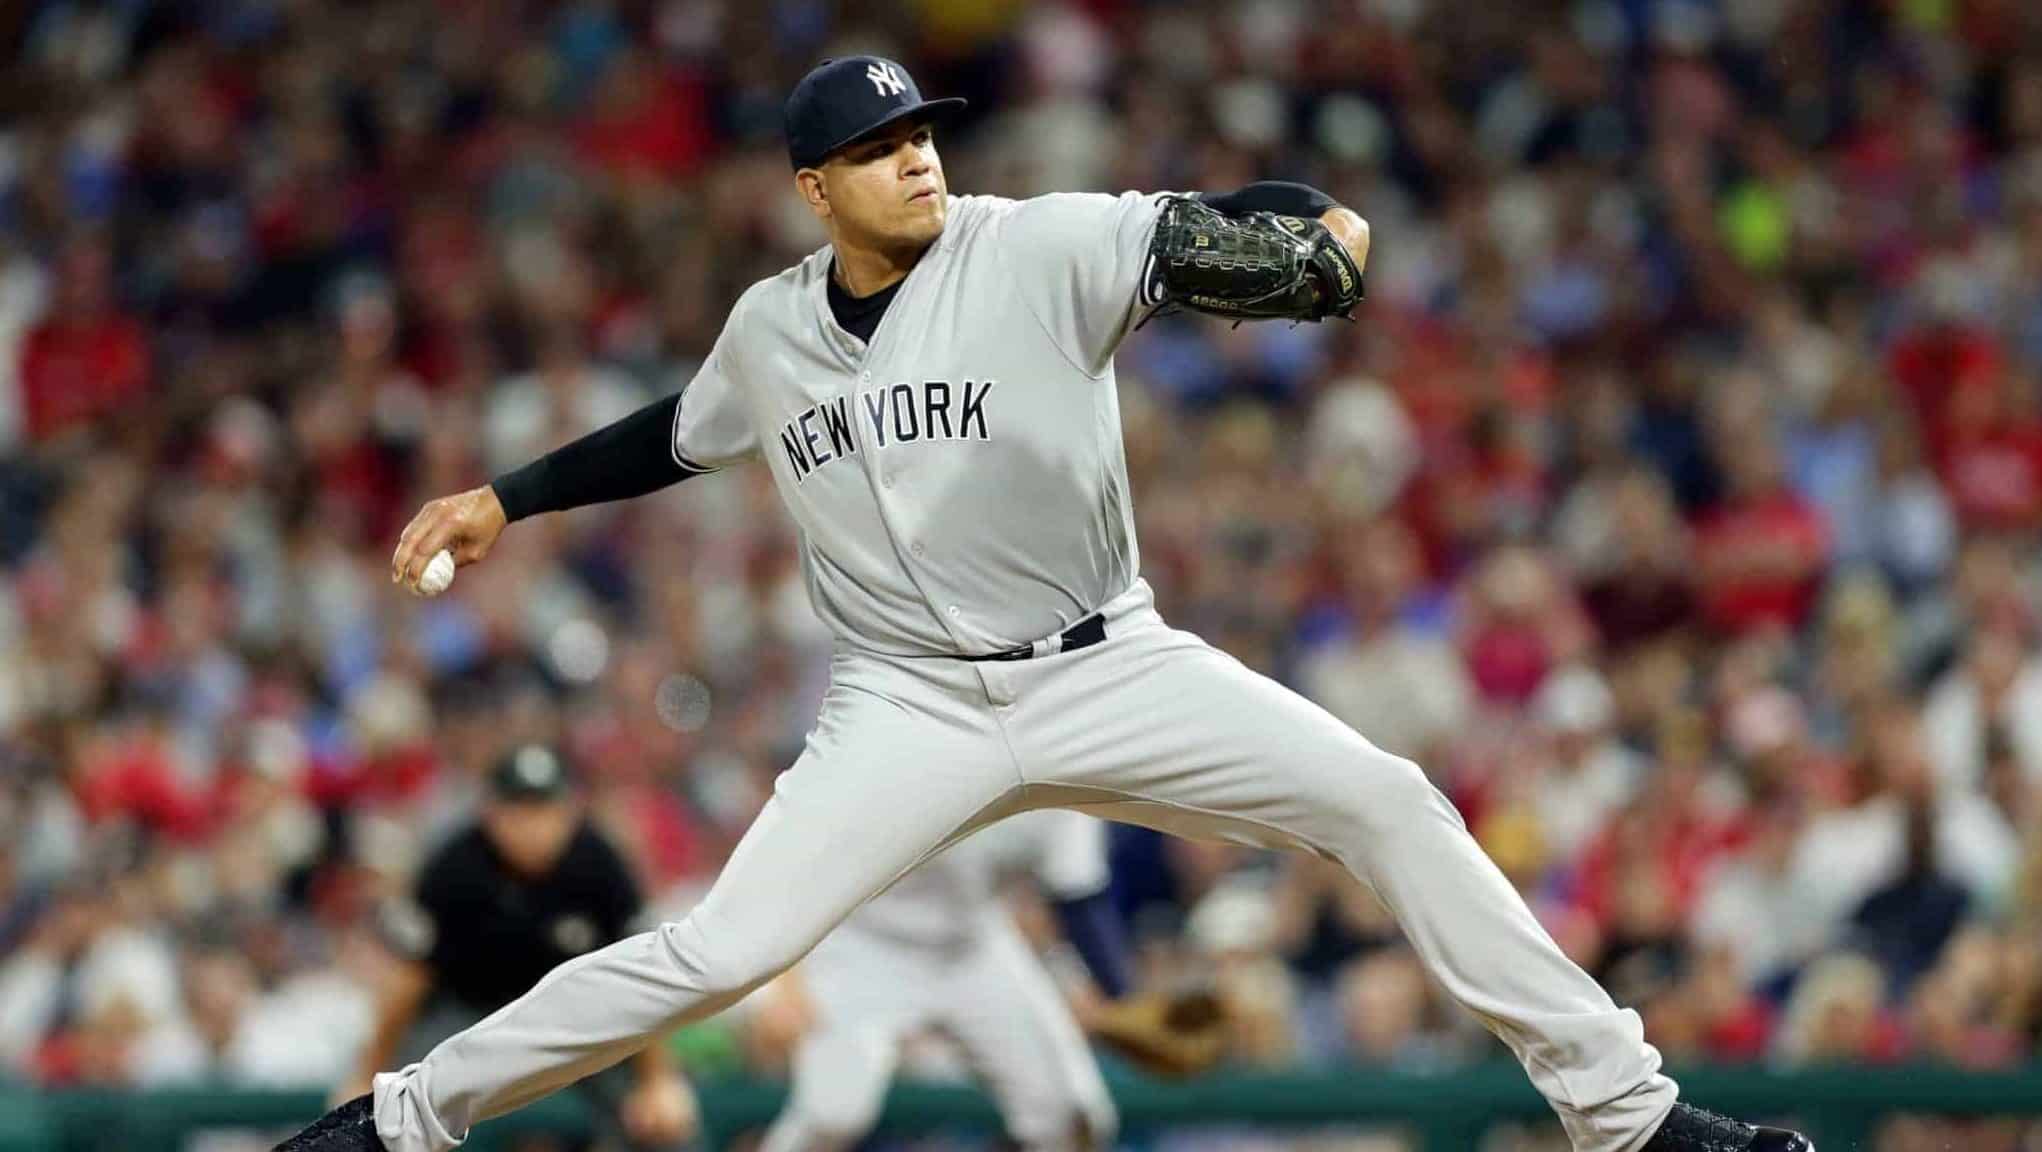 PHILADELPHIA, PA - JUNE 25: Dellin Betances #68 of the New York Yankees delivers a pitch in the seventh inning during a game against the Philadelphia Phillies at Citizens Bank Park on June 25, 2018 in Philadelphia, Pennsylvania. The Yankees won 4-2.